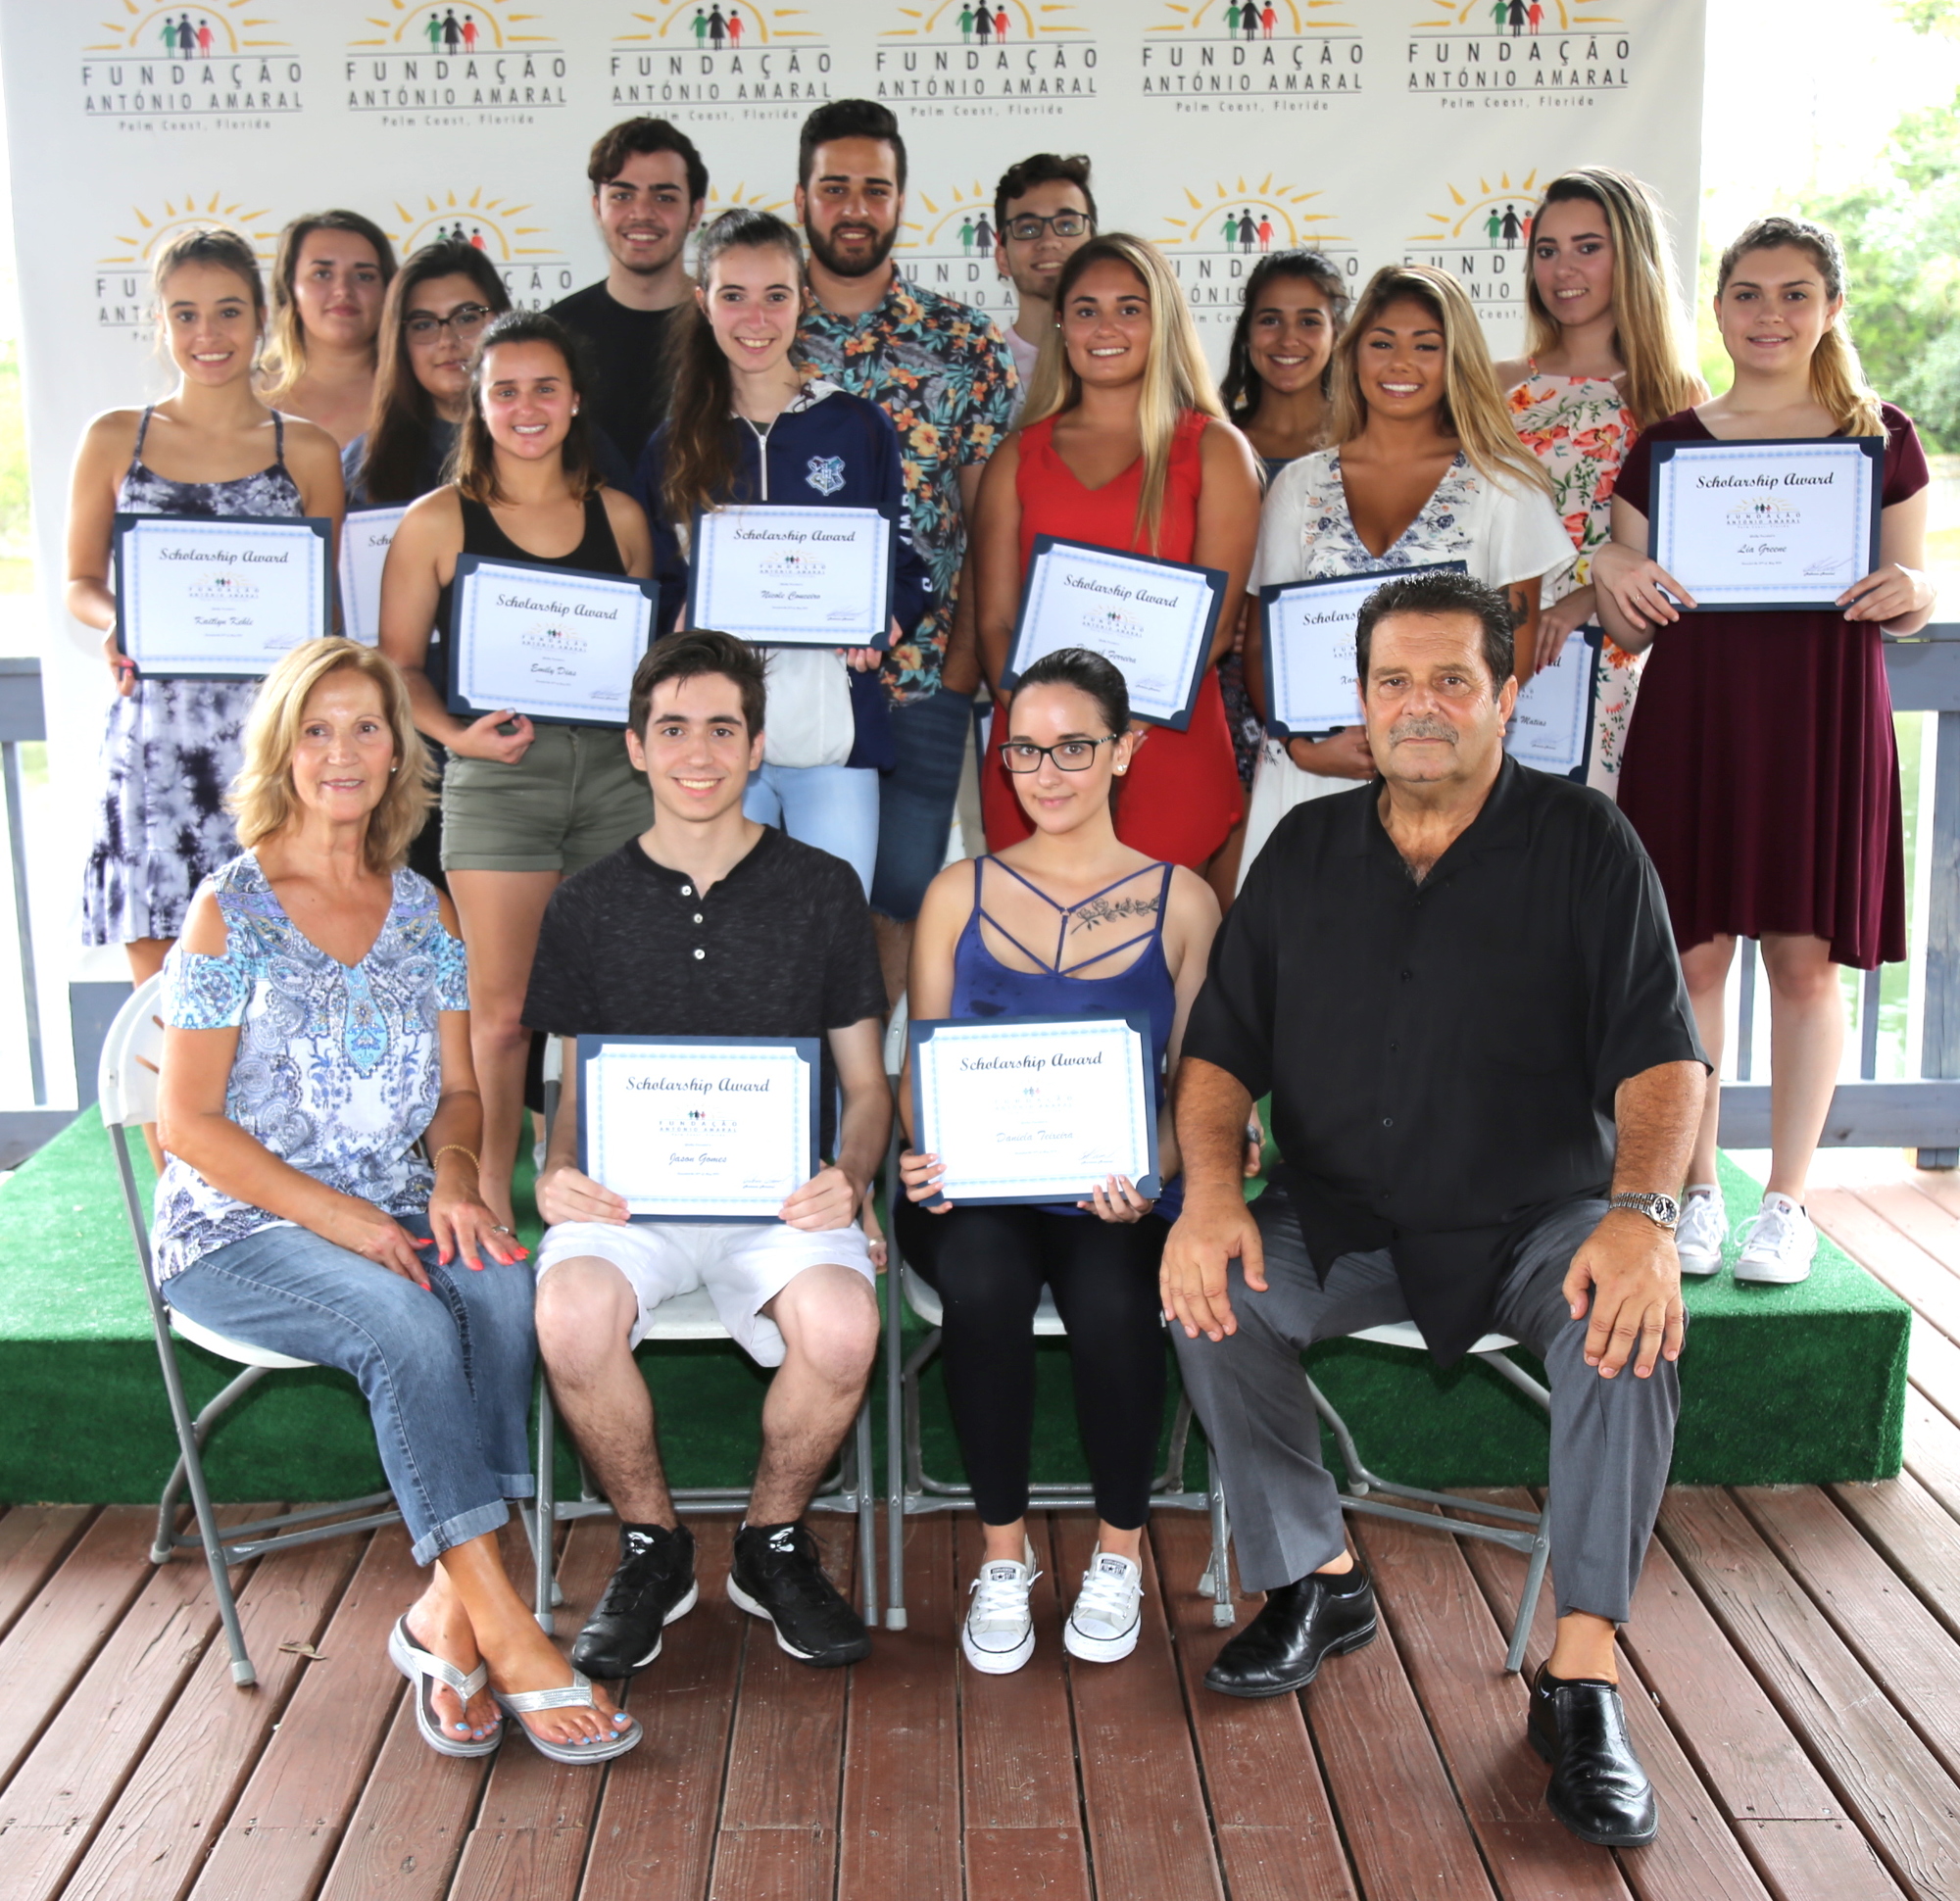 The 15 recipients of the Antonio Amarl Foundation scholarships with Maria and Tony Amaral (missing from photo Adriana Dos Santos). Photo courtesy of Henrique Mano